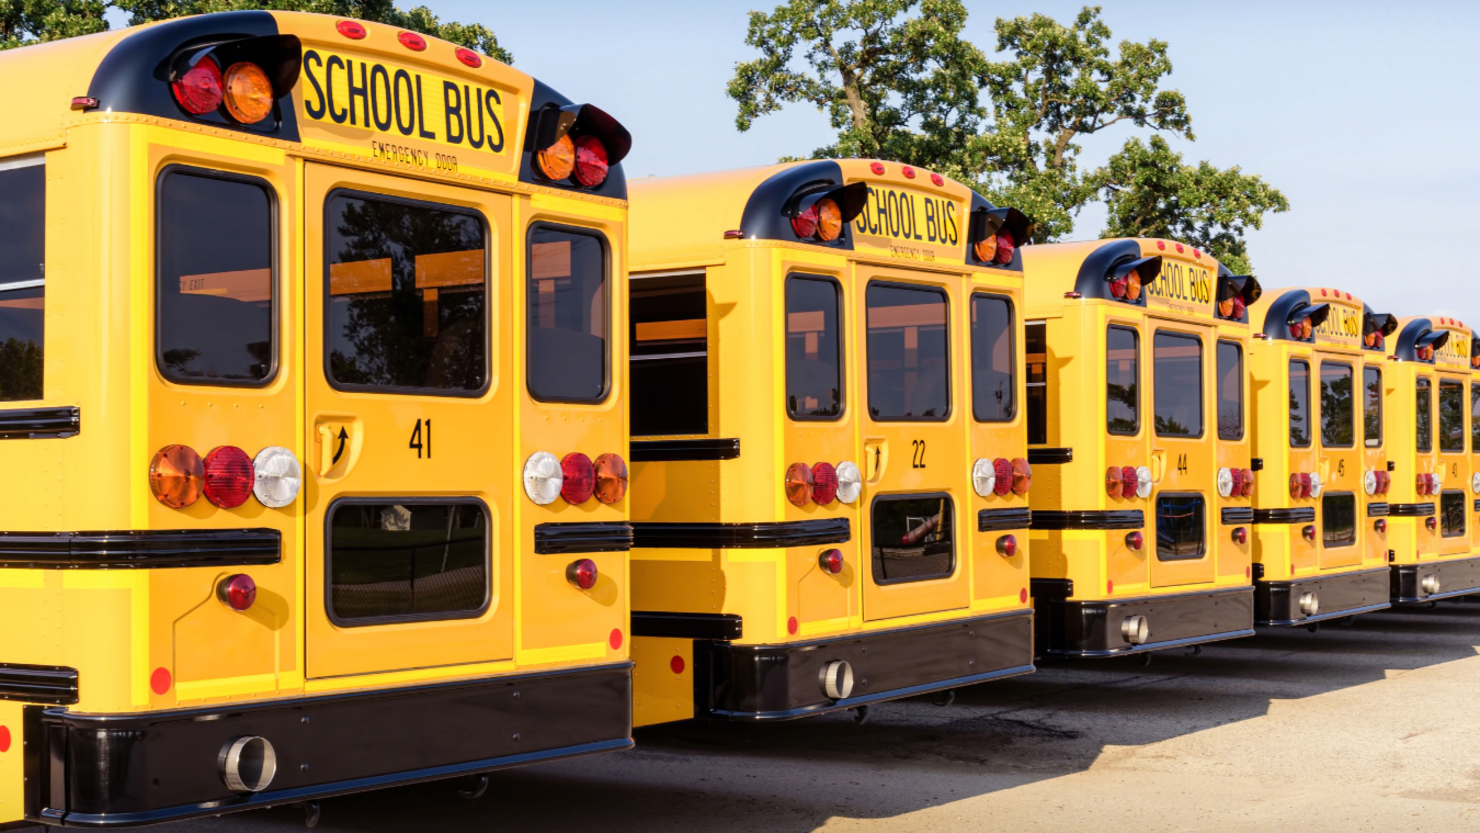 65 School Buses With Donations Travel Across Kentucky For Tornado